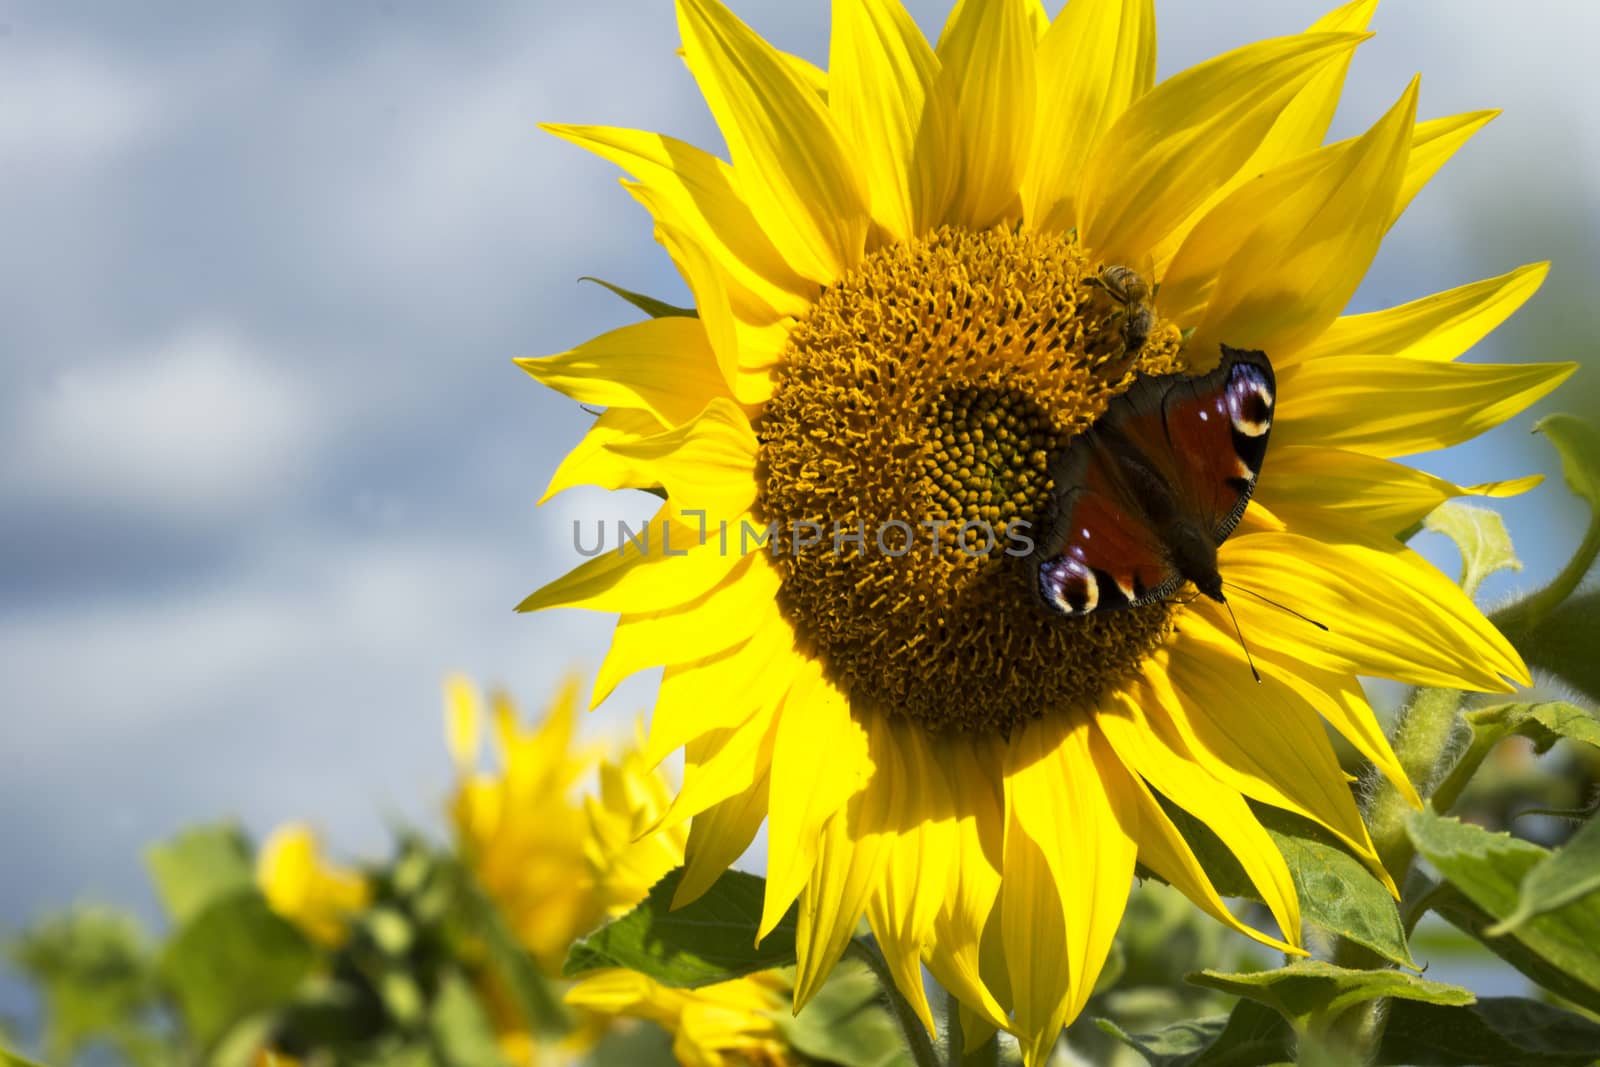 Sunflower with a butterfly by Fr@nk